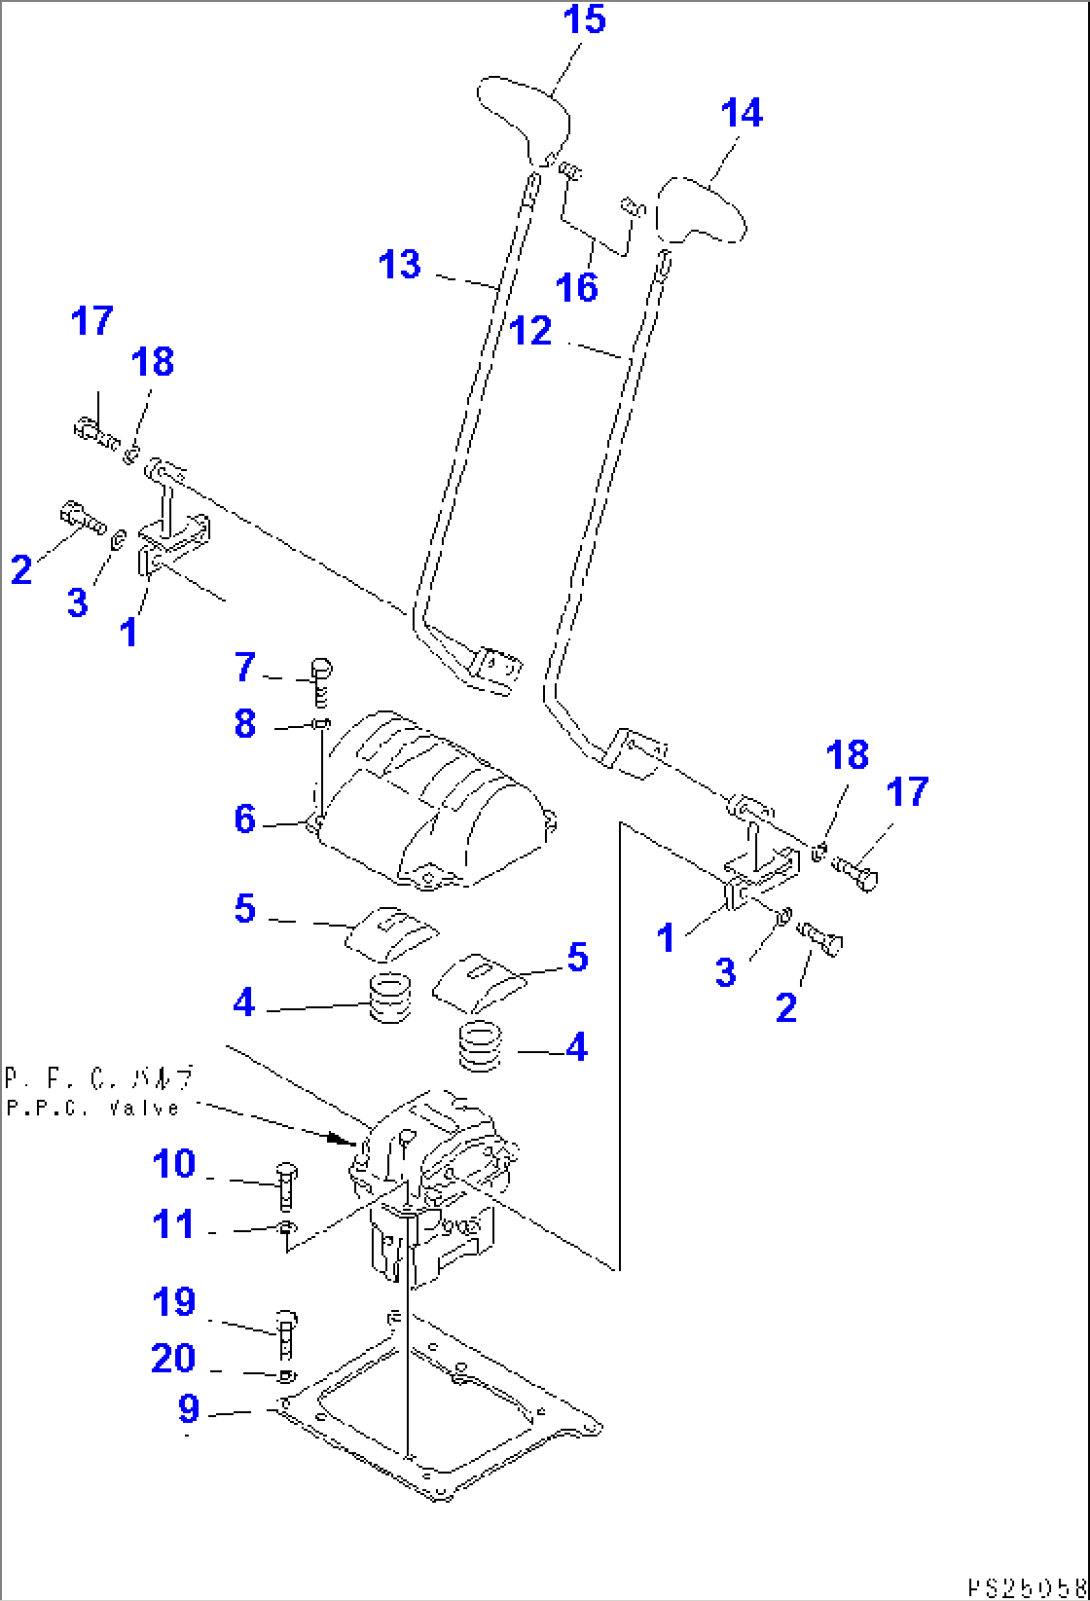 TRAVEL CONTROL LEVER AND LINKAGE(#1101-)